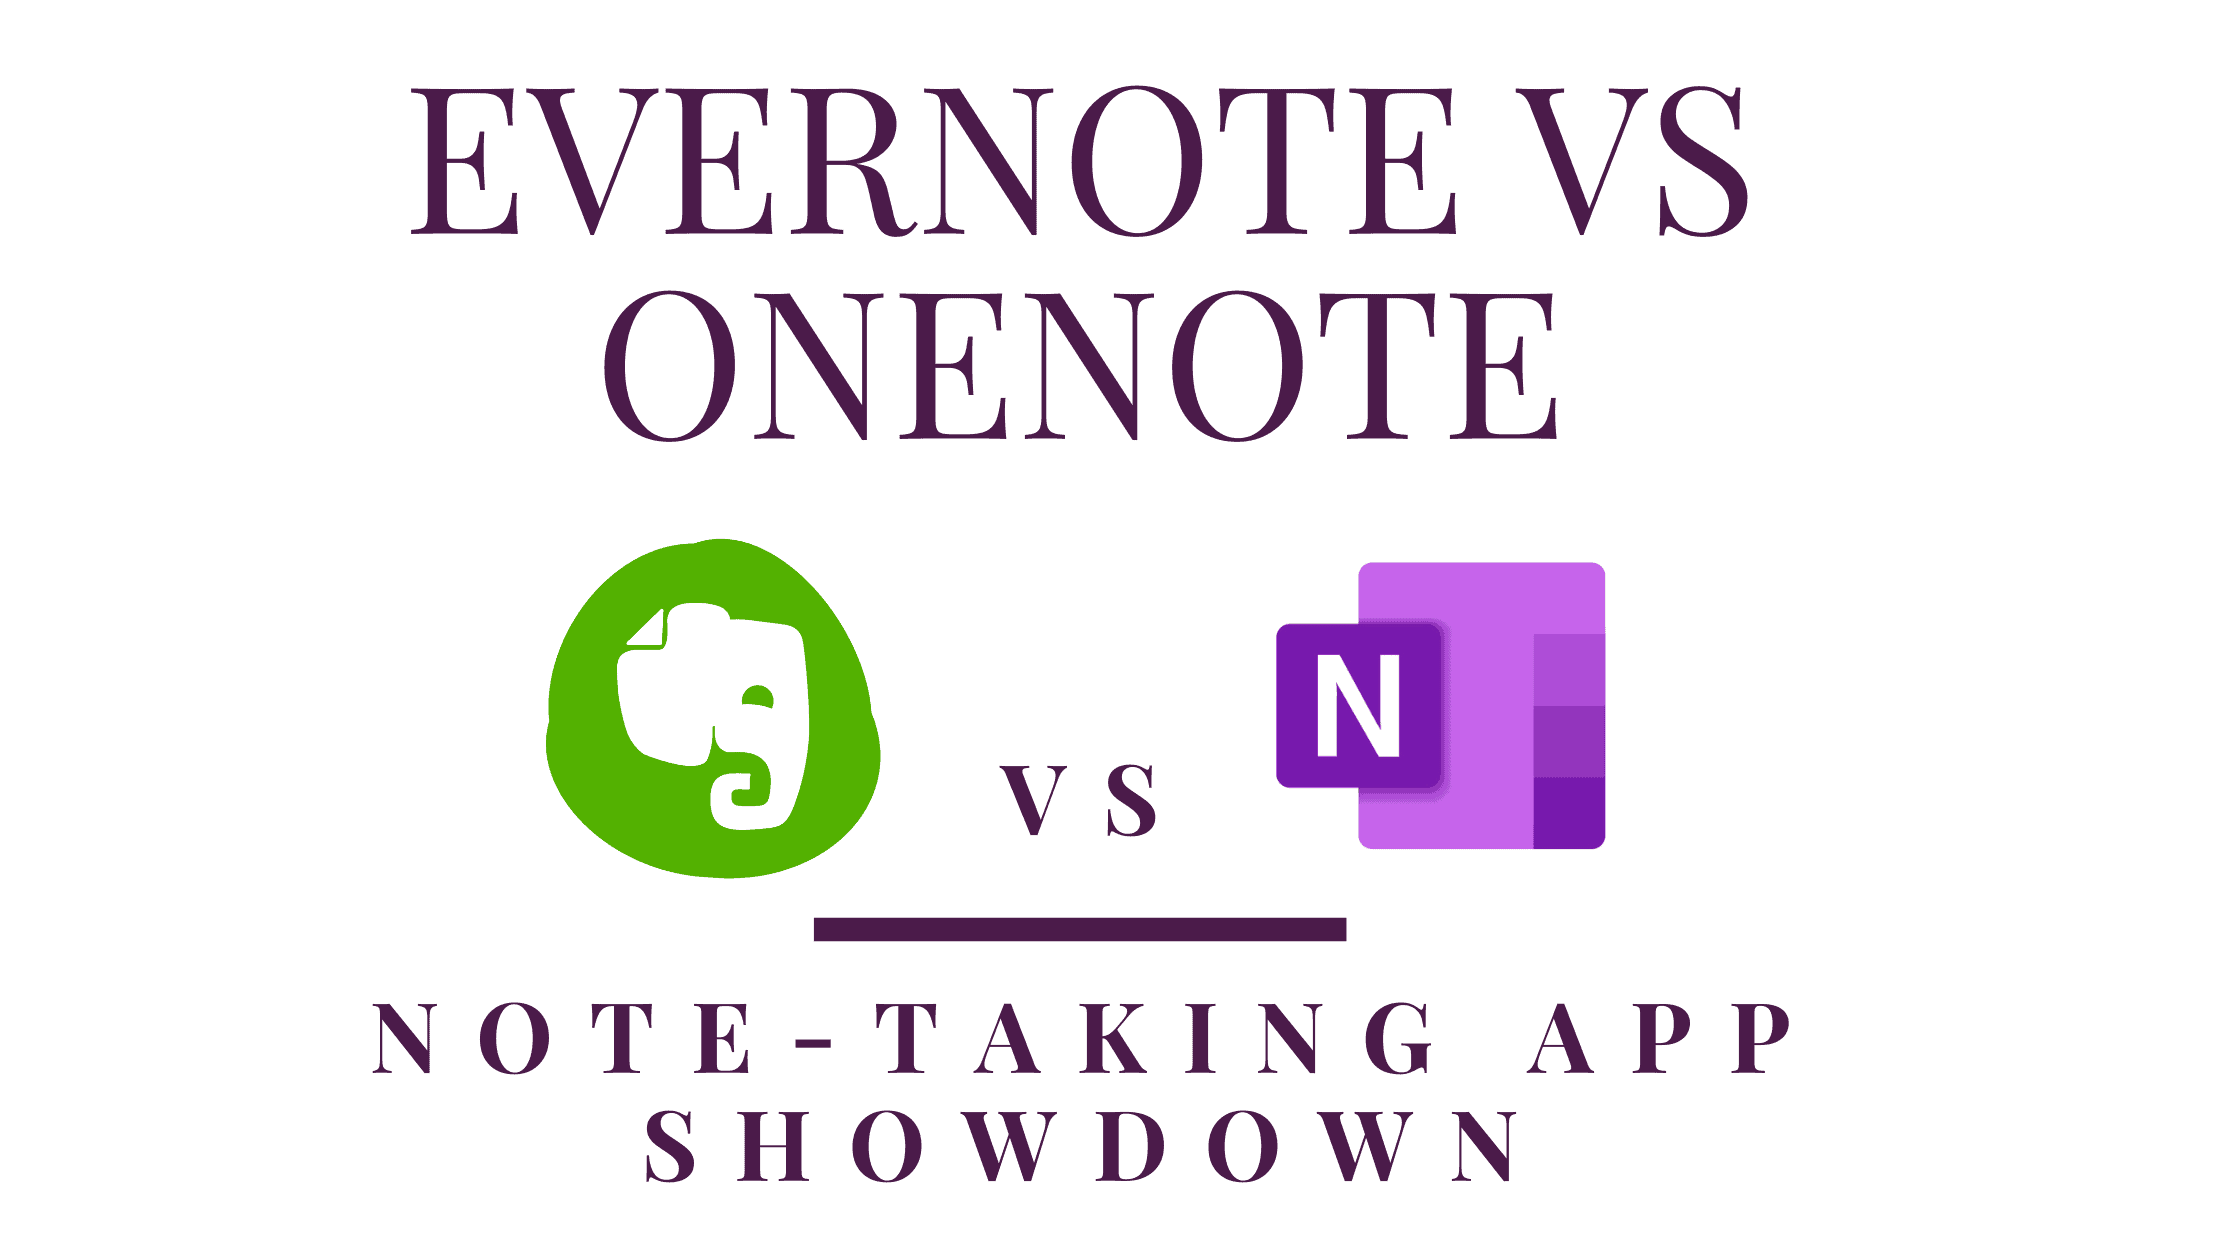 tablet note taking onenote convert to text